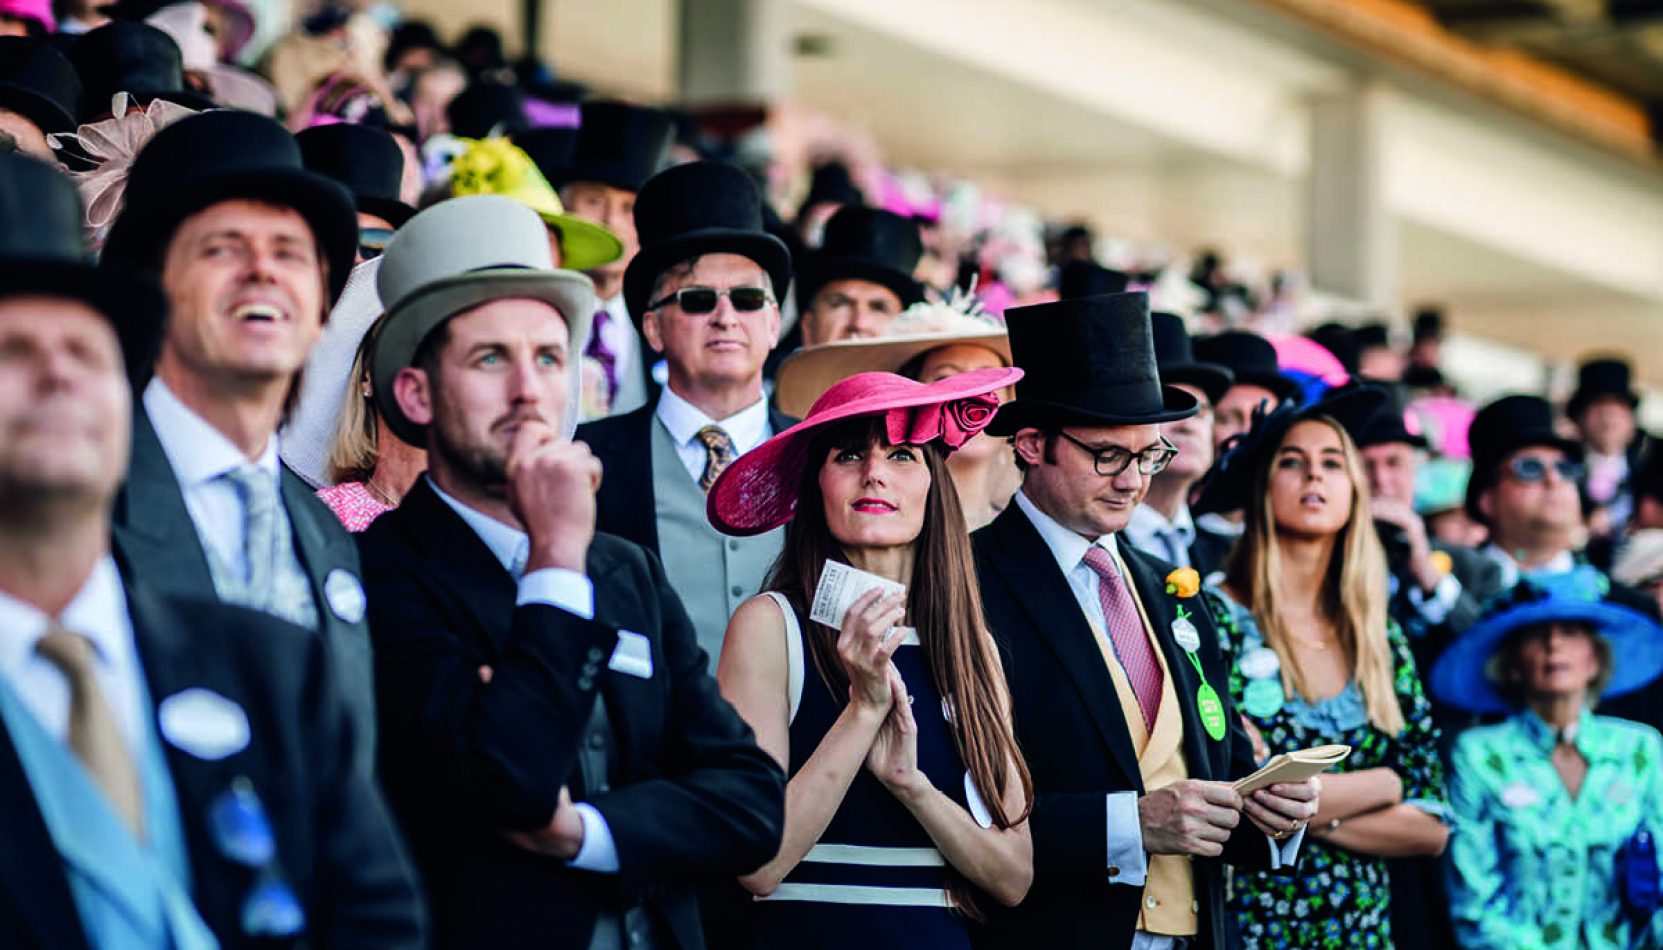 royal ascot, horse racing, events, guide to whats on this week, whats on this week in surrey, guide to whats on, guide to, guide to surrey, guide to ascot,